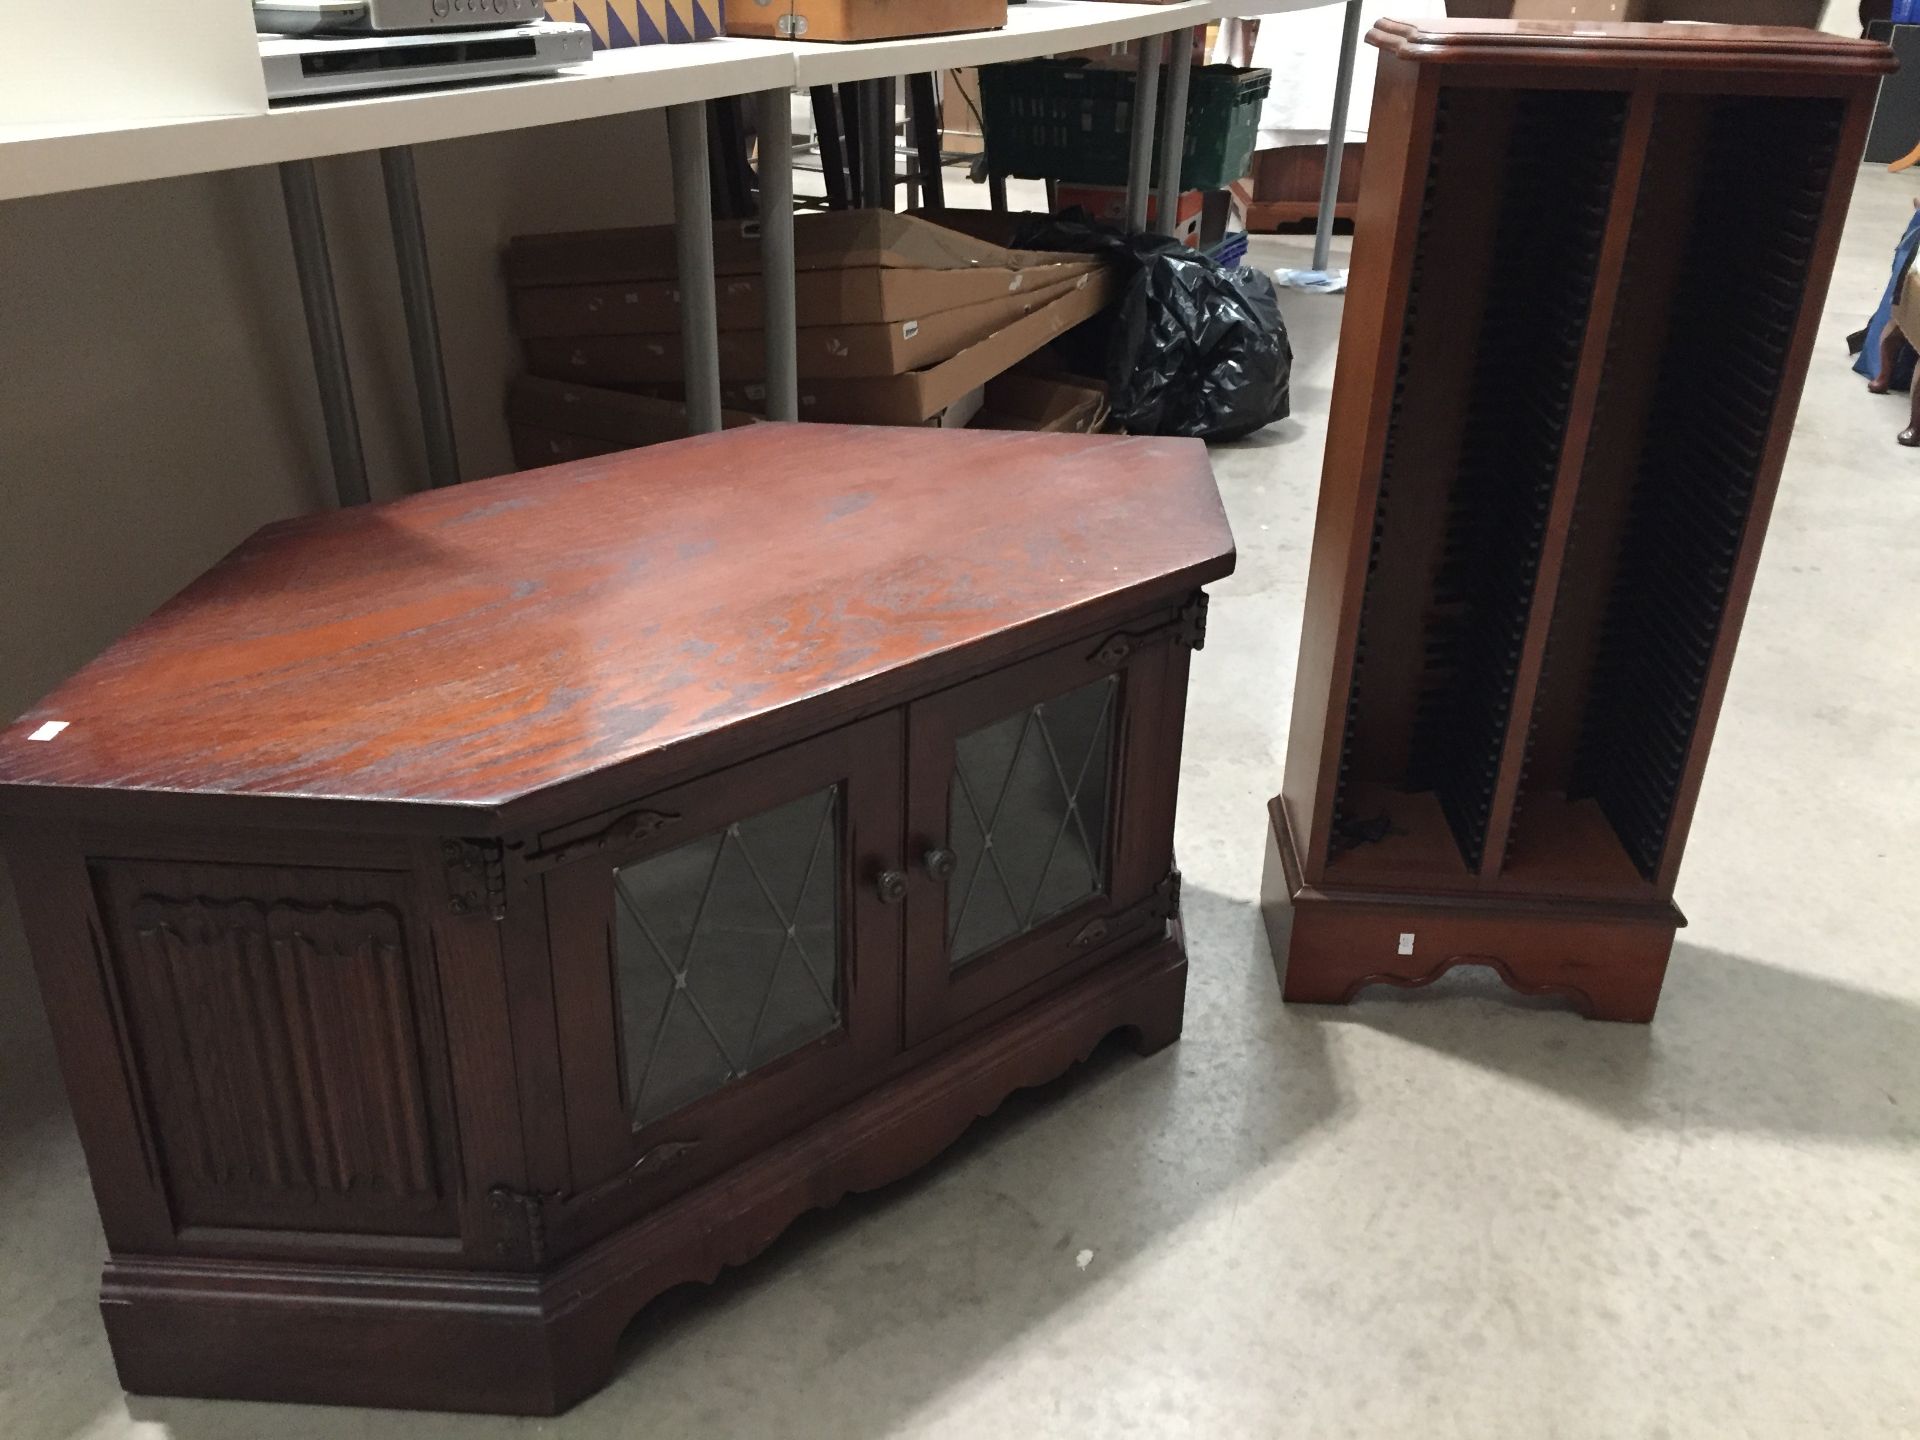 2 Items - Wood Bros Old Charm Hexagonal Mahogany Corner TV Stand with leaded glass doors and